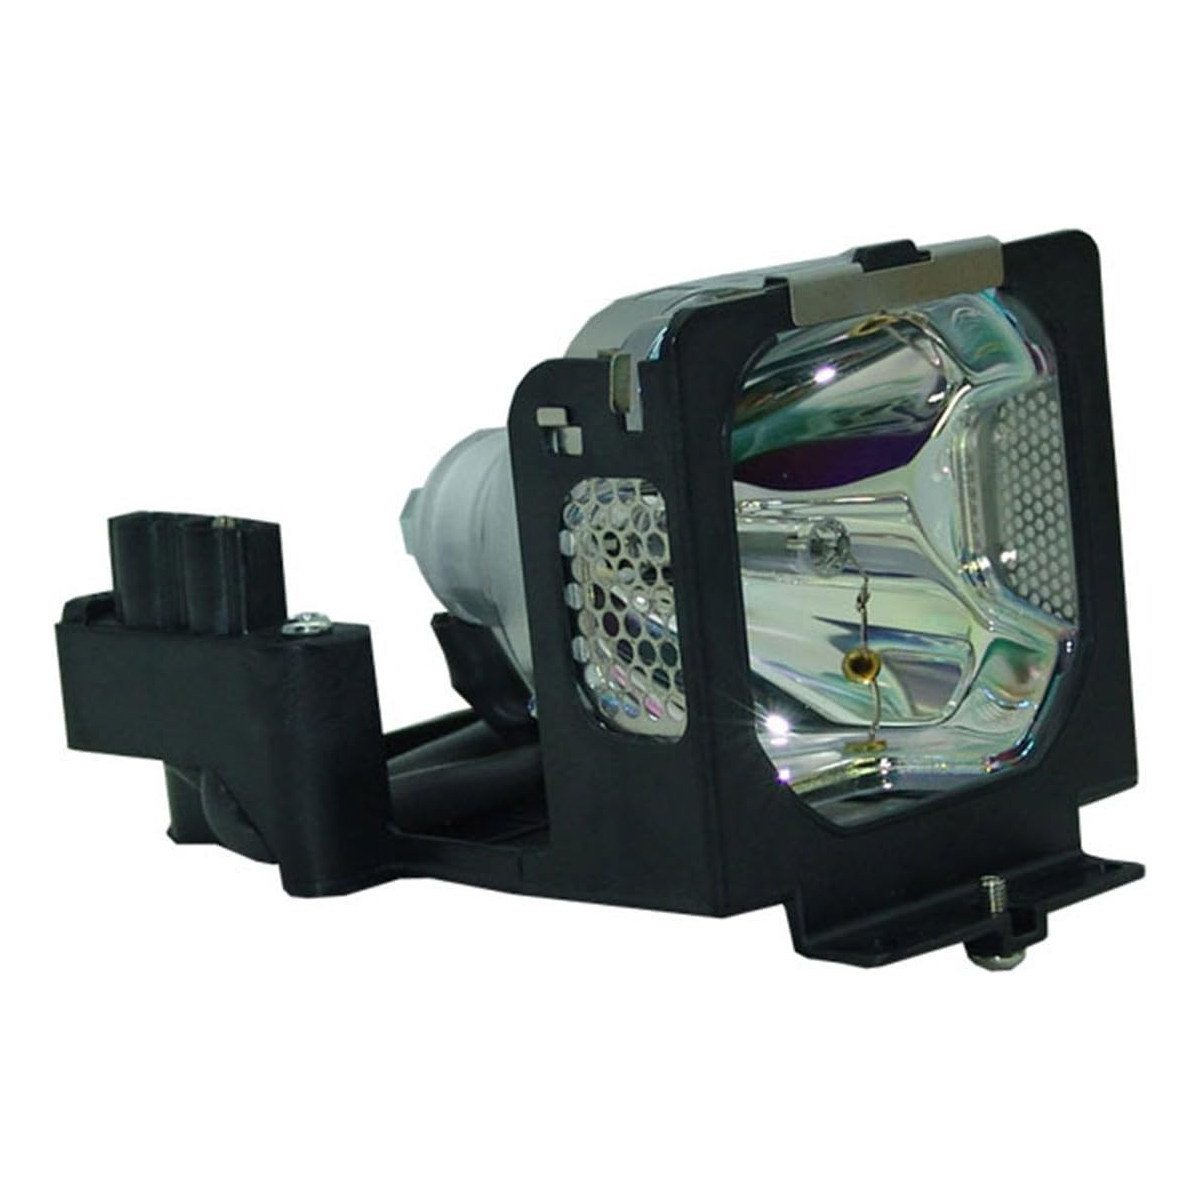 Replacement Projector lamp 03-000754-01P For CHRISTIE VIVID LX25